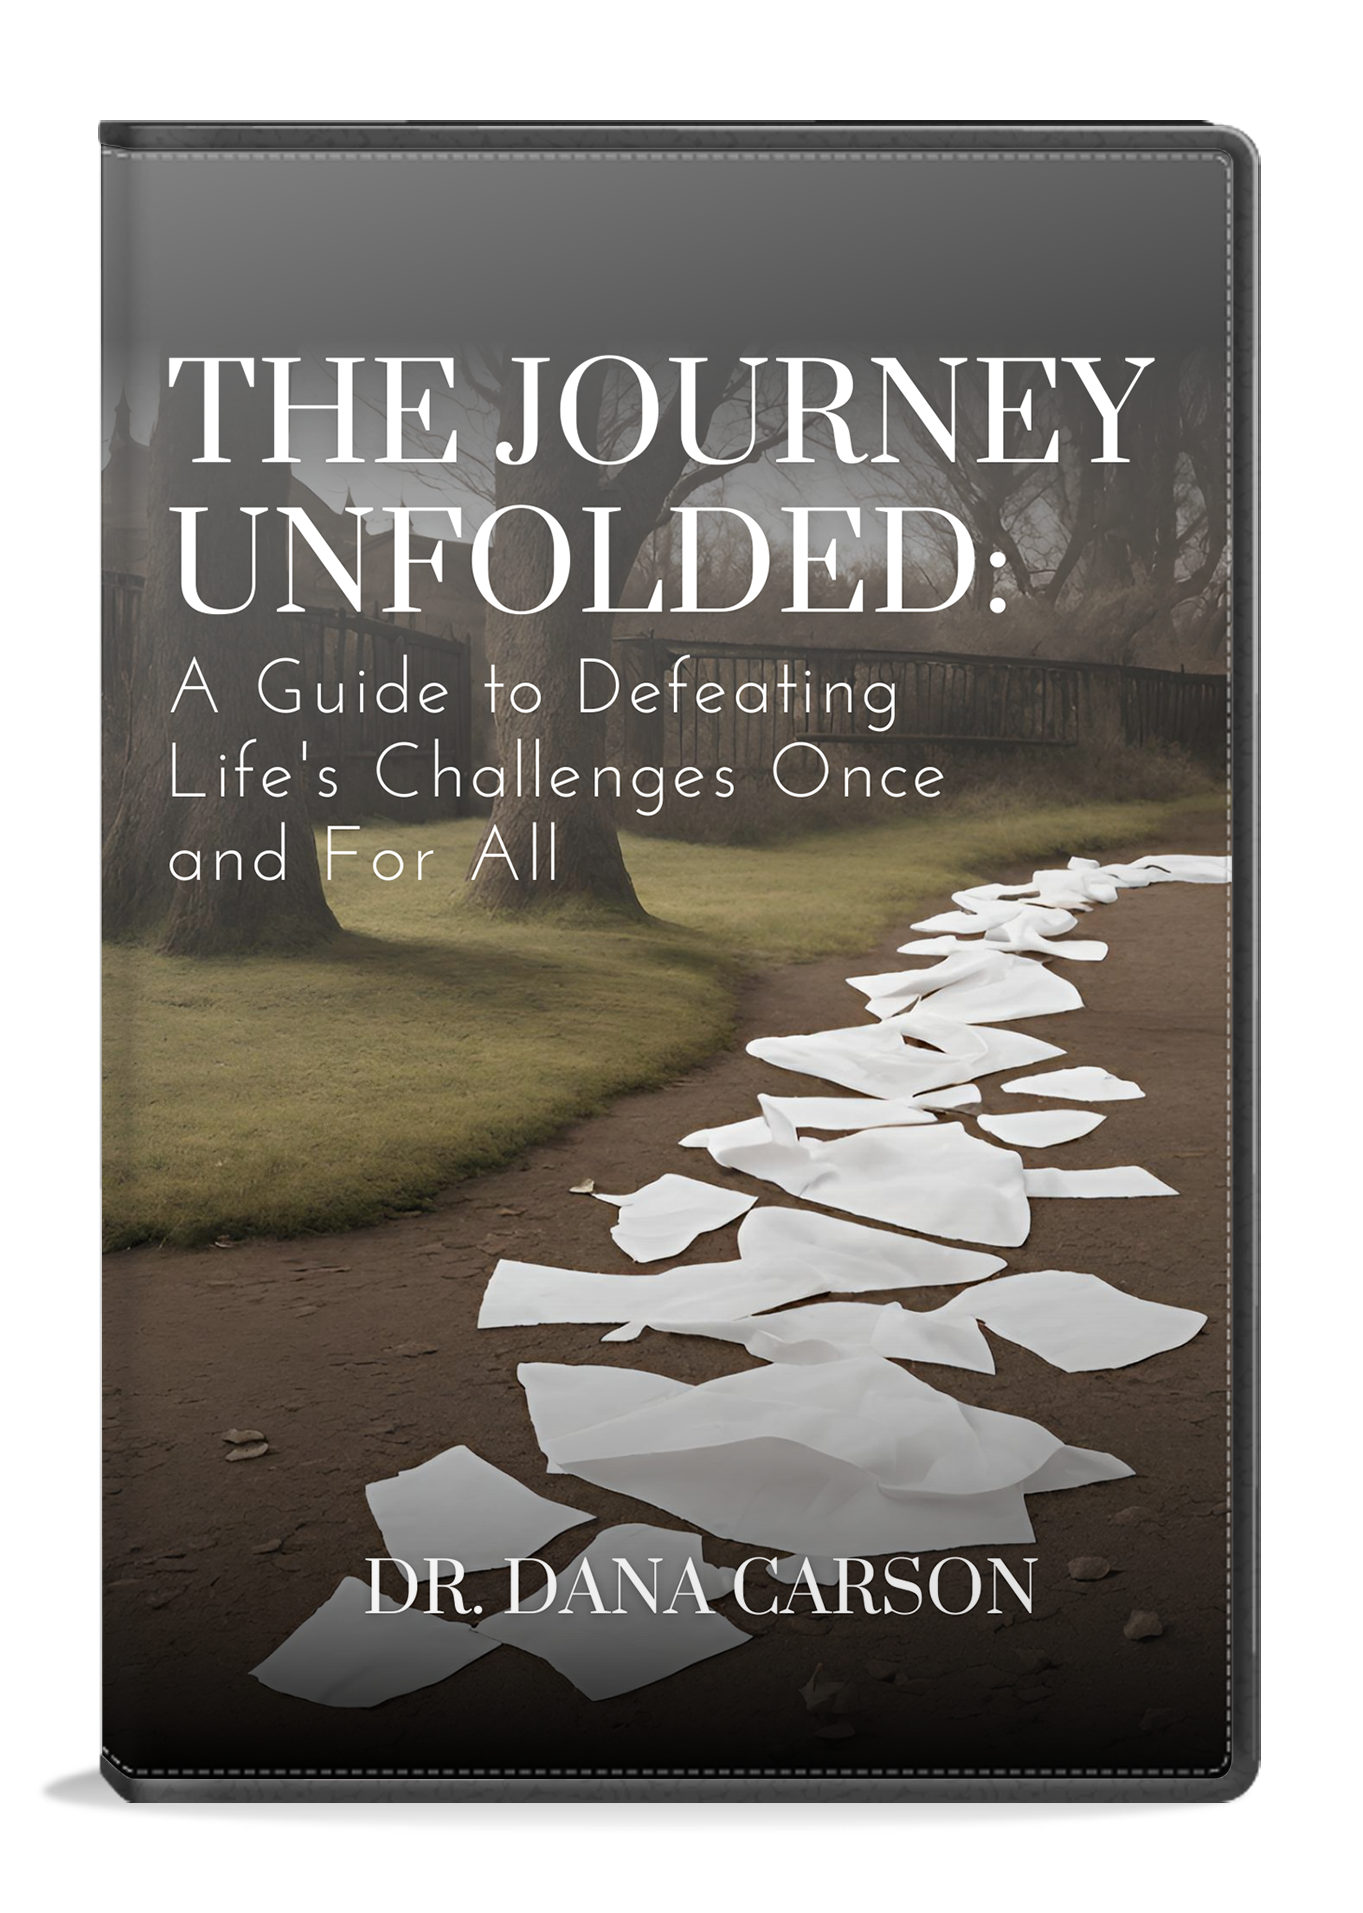 The Journey Unfolded: A Guide to Defeating Life's Challenges Once and For All